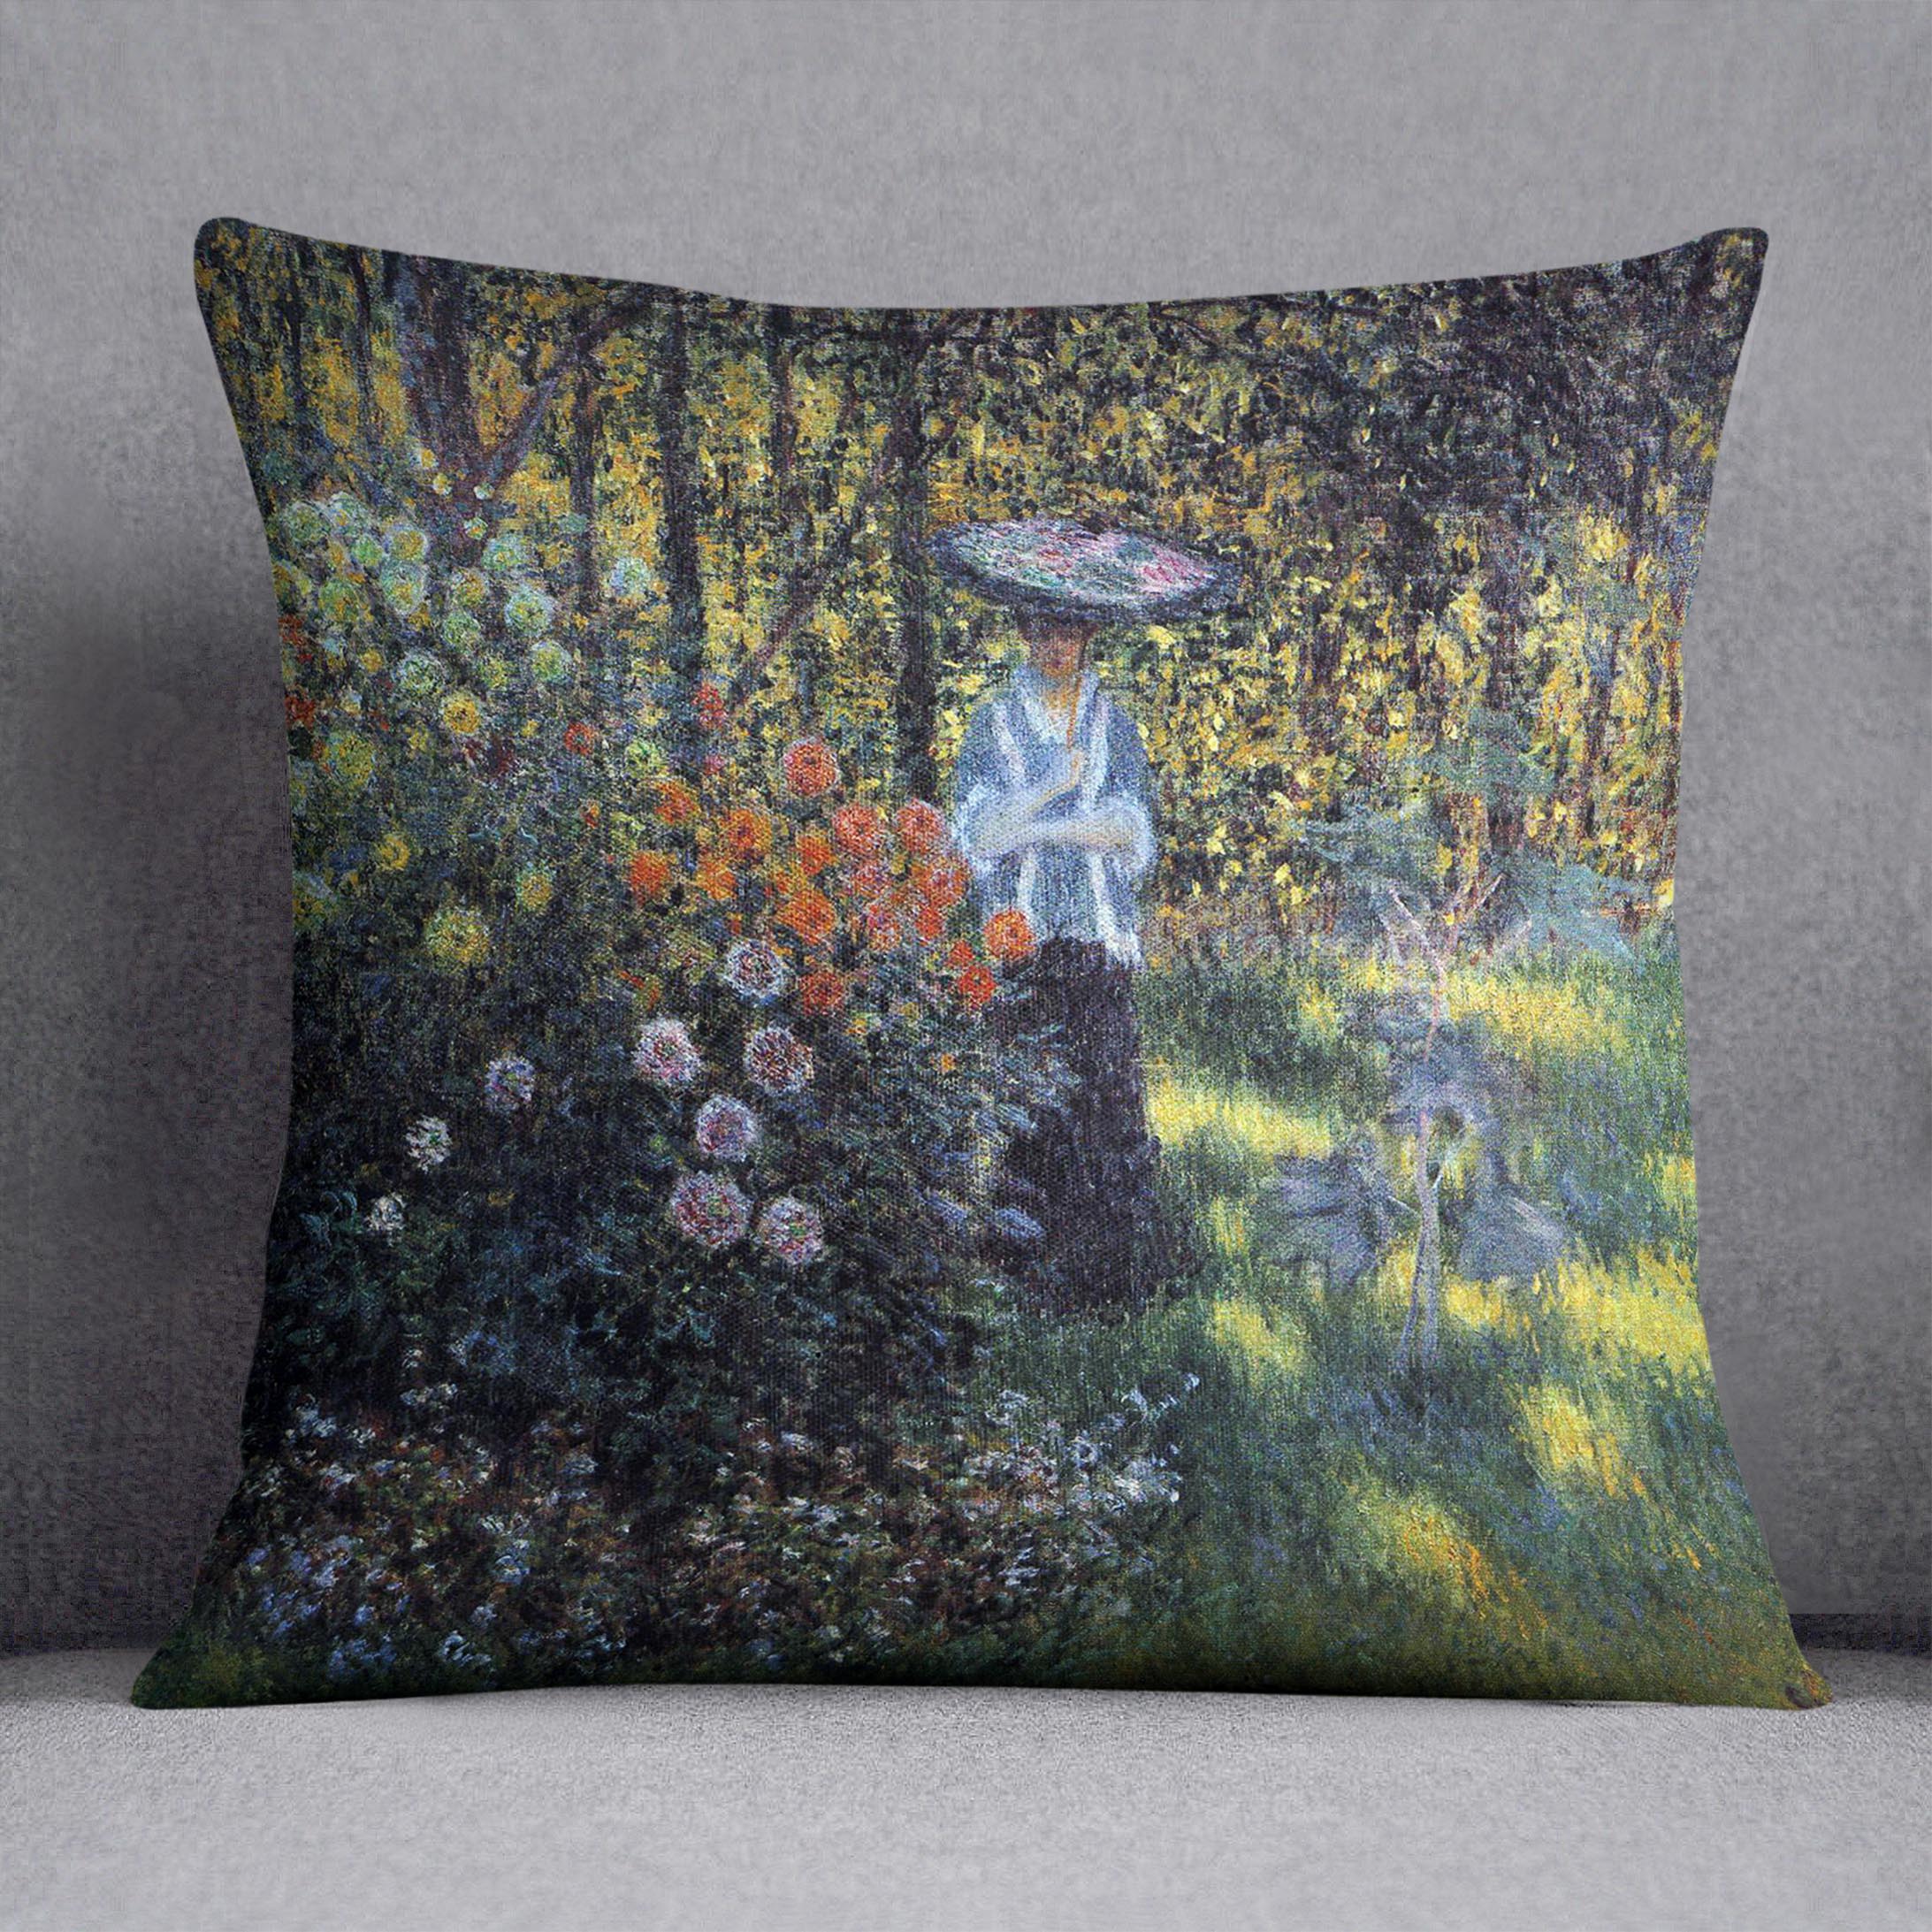 Woman with a parasol in the garden of Argenteuil by Monet Cushion